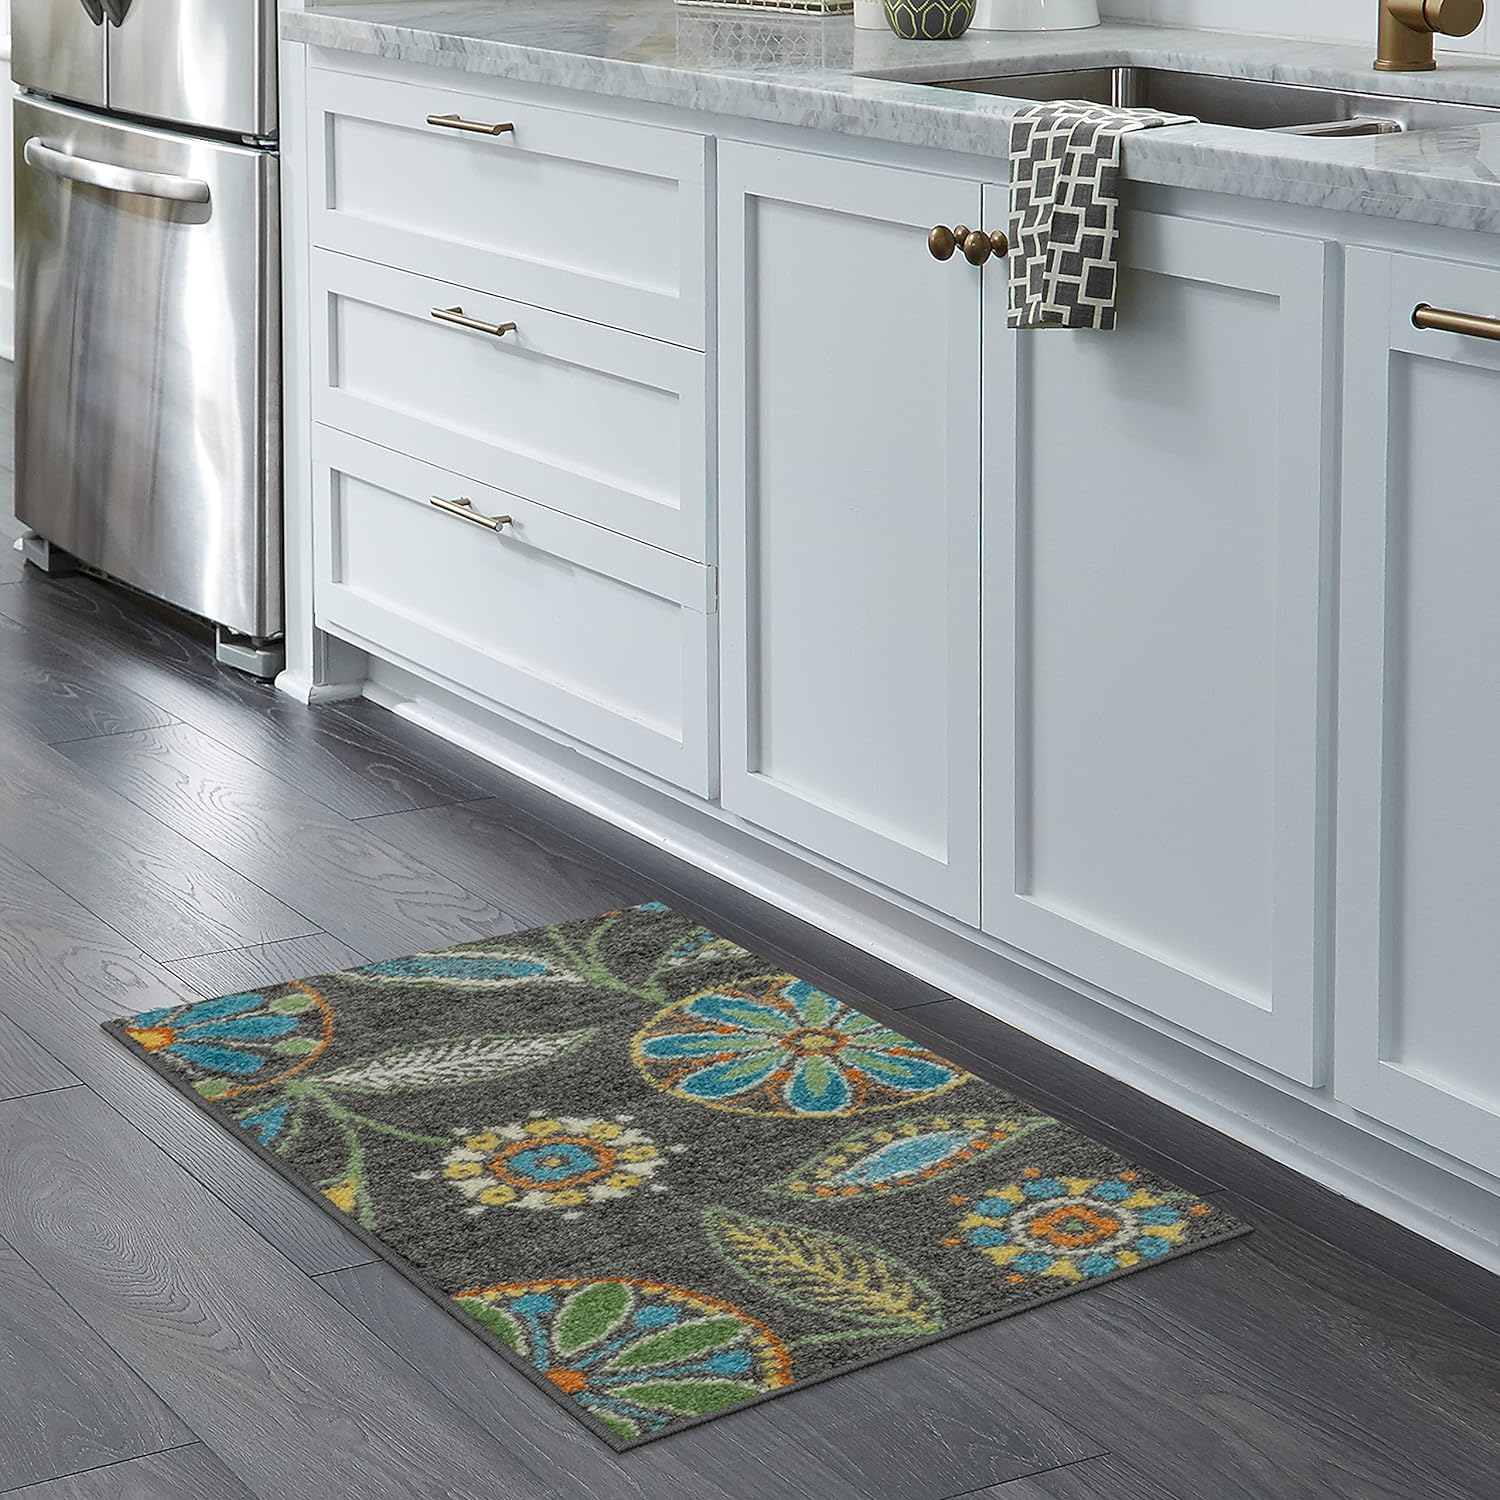 Maples Rugs Reggie Floral Kitchen Rugs Non Skid Washable Accent Area Carpet [Made in USA], Multi, 1'8 x 2'10